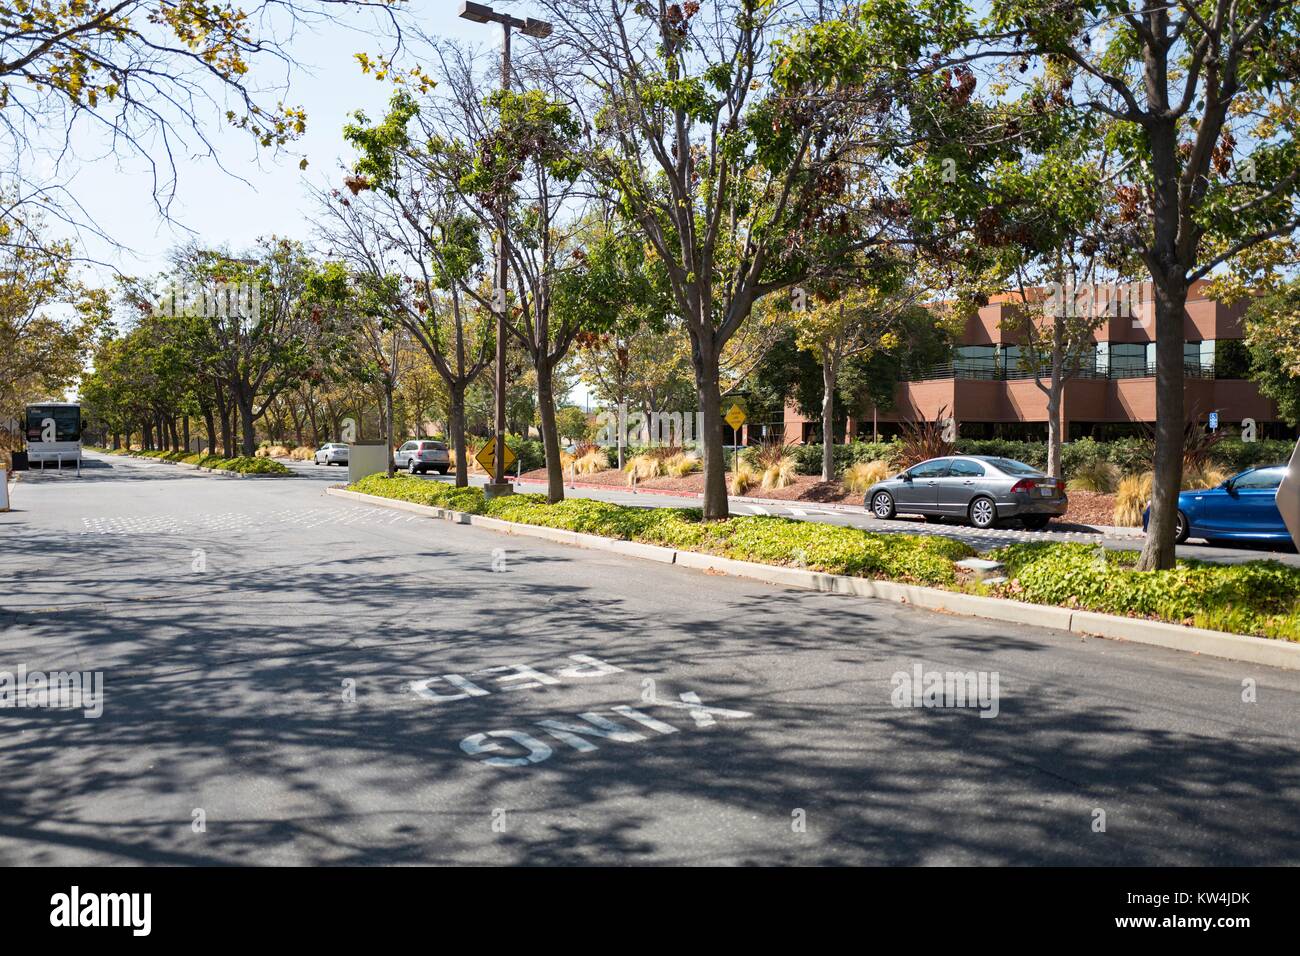 Cars parked along a tree-lined street at the headquarters of professional social networking company LinkedIn, in the Silicon Valley town of Mountain View, California, August 24, 2016. Stock Photo